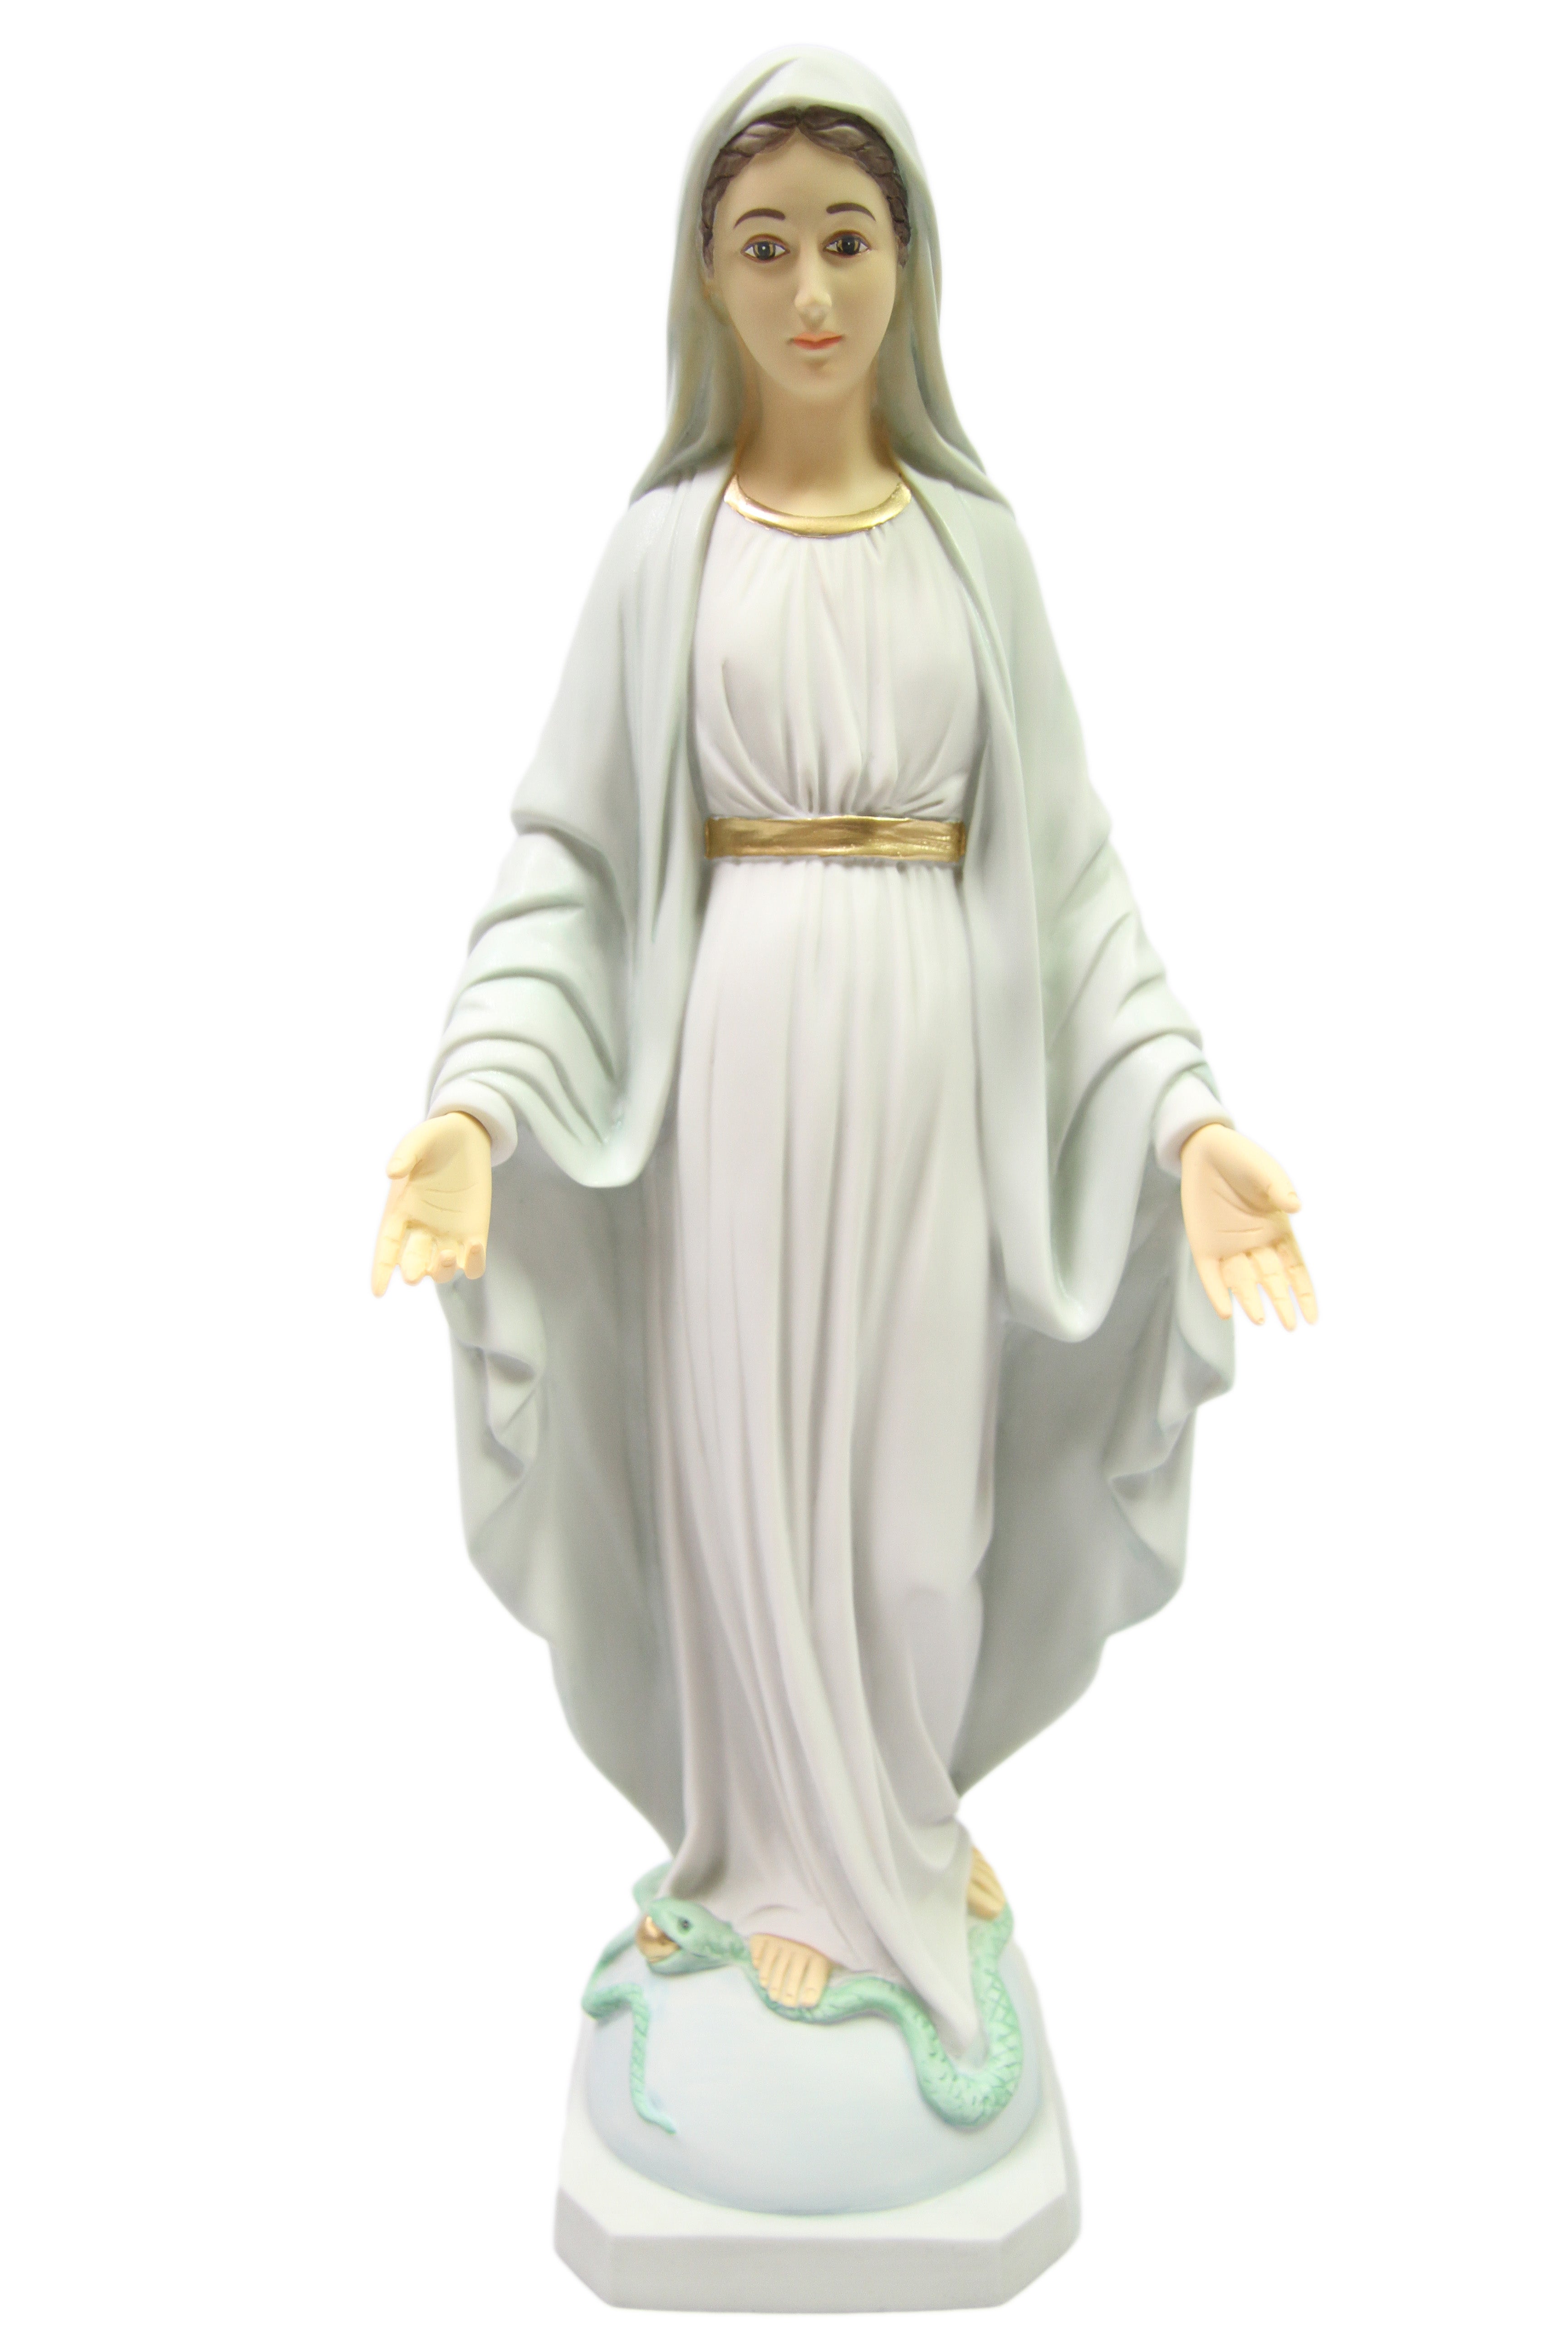 19 Inch Our Lady of Grace Virgin Mary Religious Catholic Statue Vittoria Collection Made in Italy